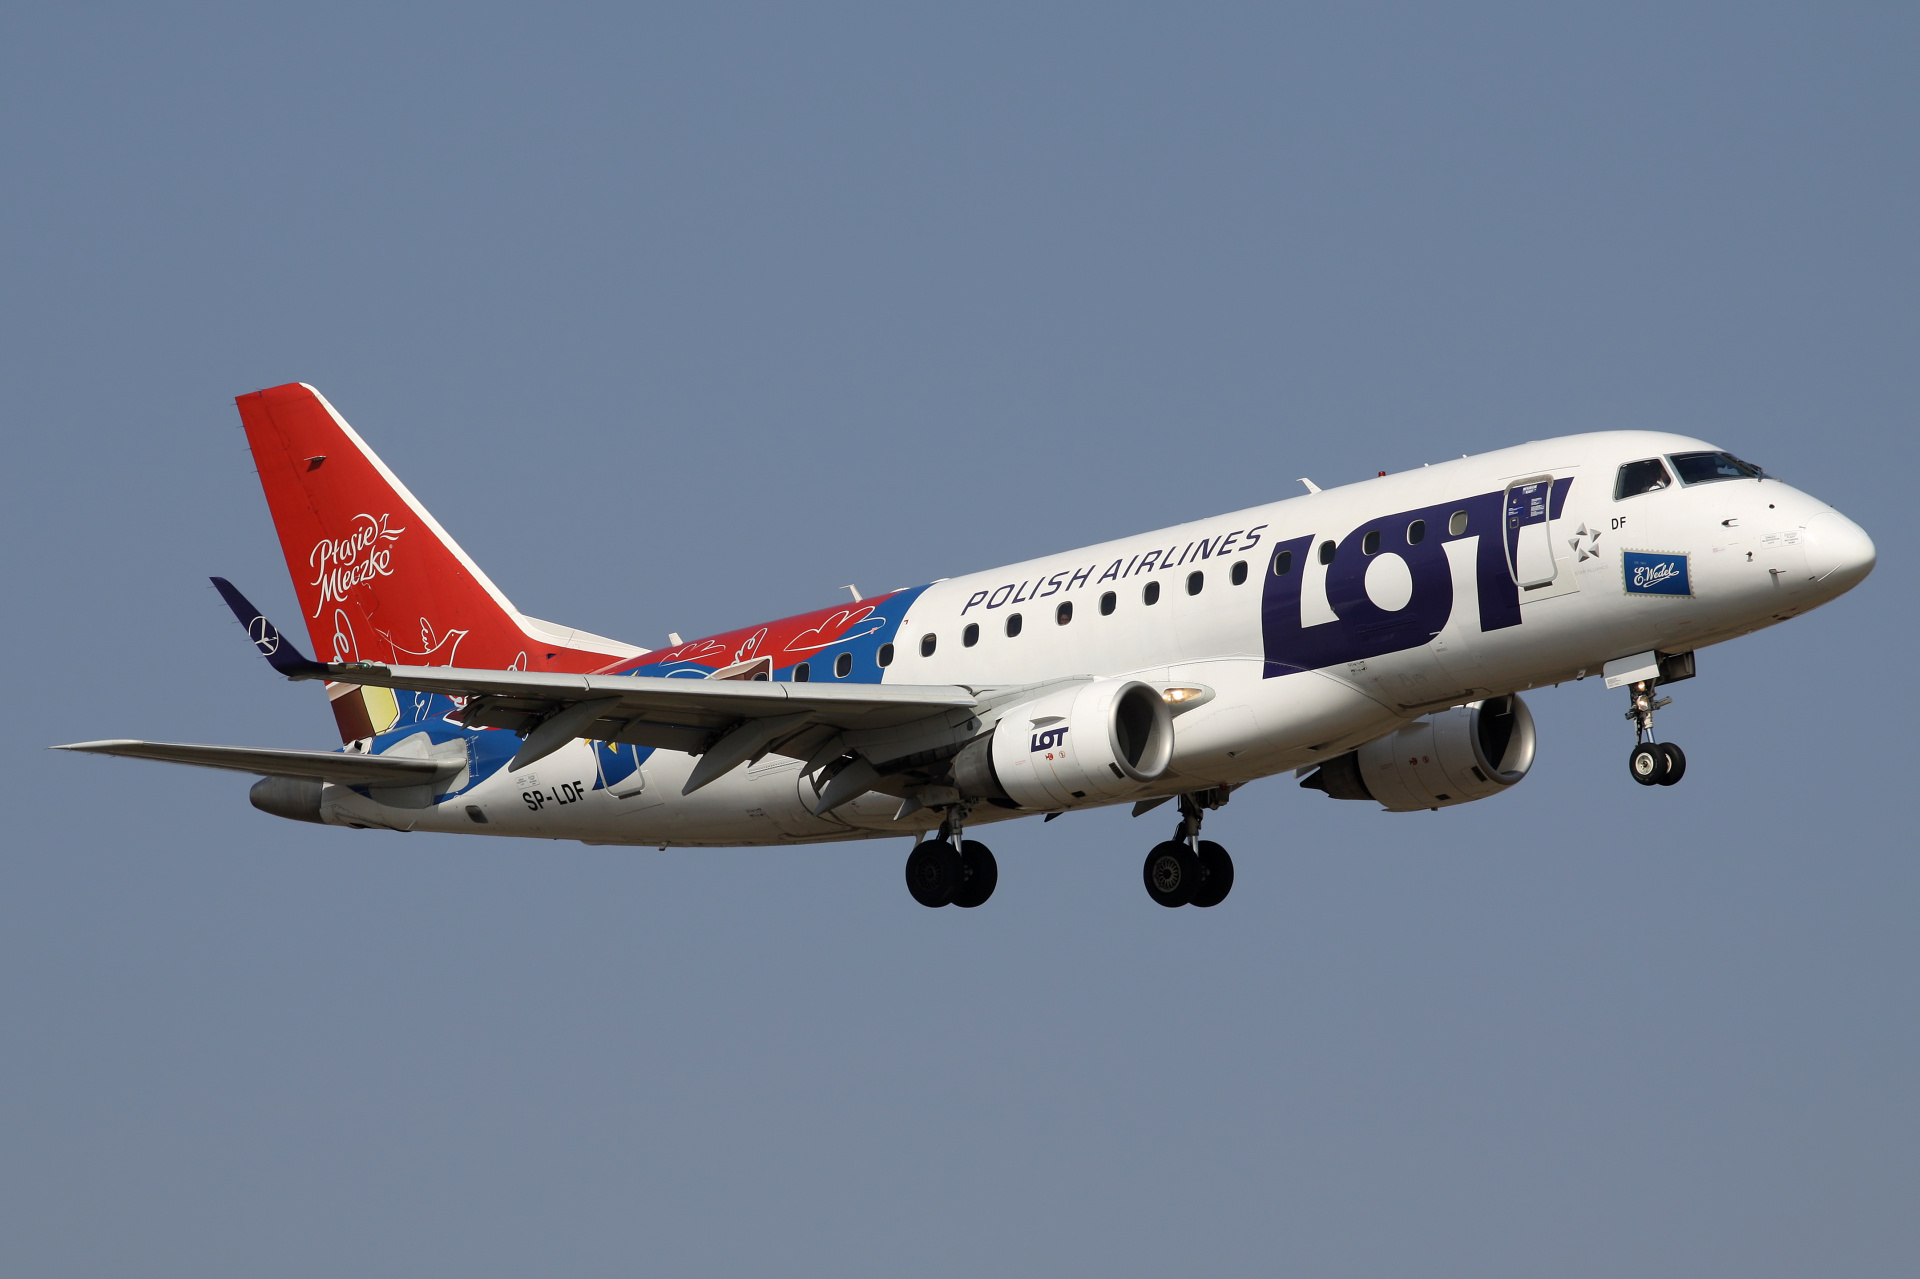 SP-LDF (Wedel Ptasie Mleczko livery) (Aircraft » EPWA Spotting » Embraer E170 » LOT Polish Airlines)